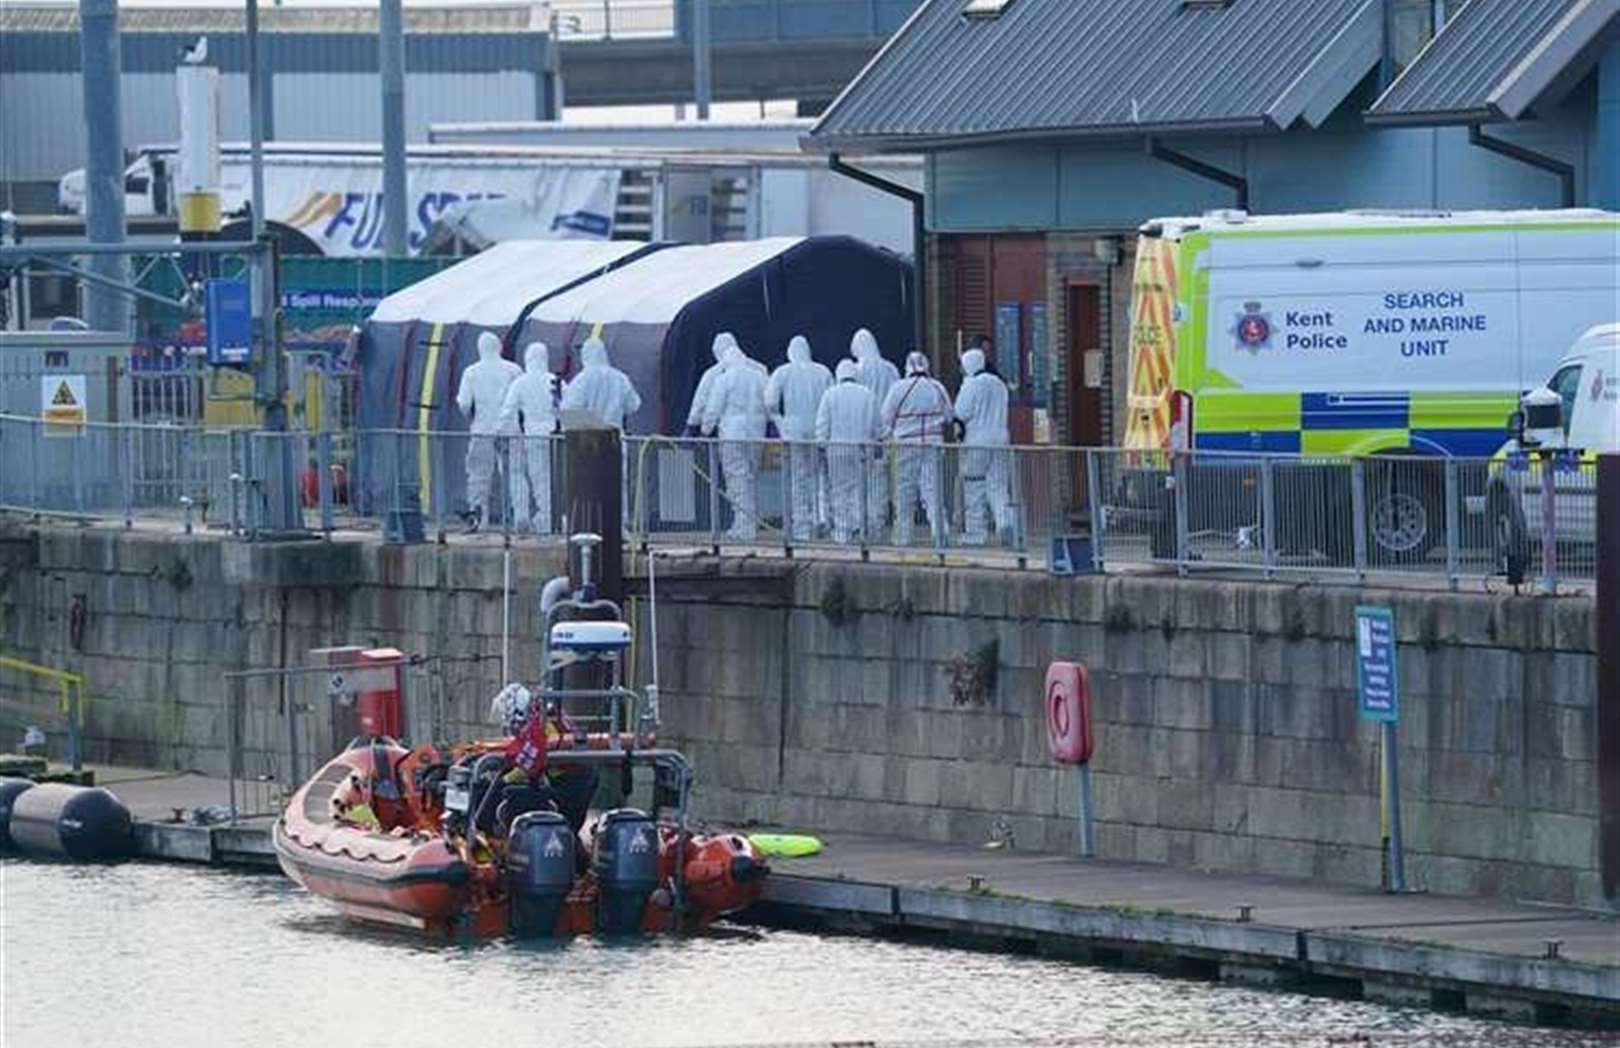 Emergency services at the RNLI station at the Port of Dover after four people died when a migrant boat capsized in the Channel. (Gareth Fuller/PA)